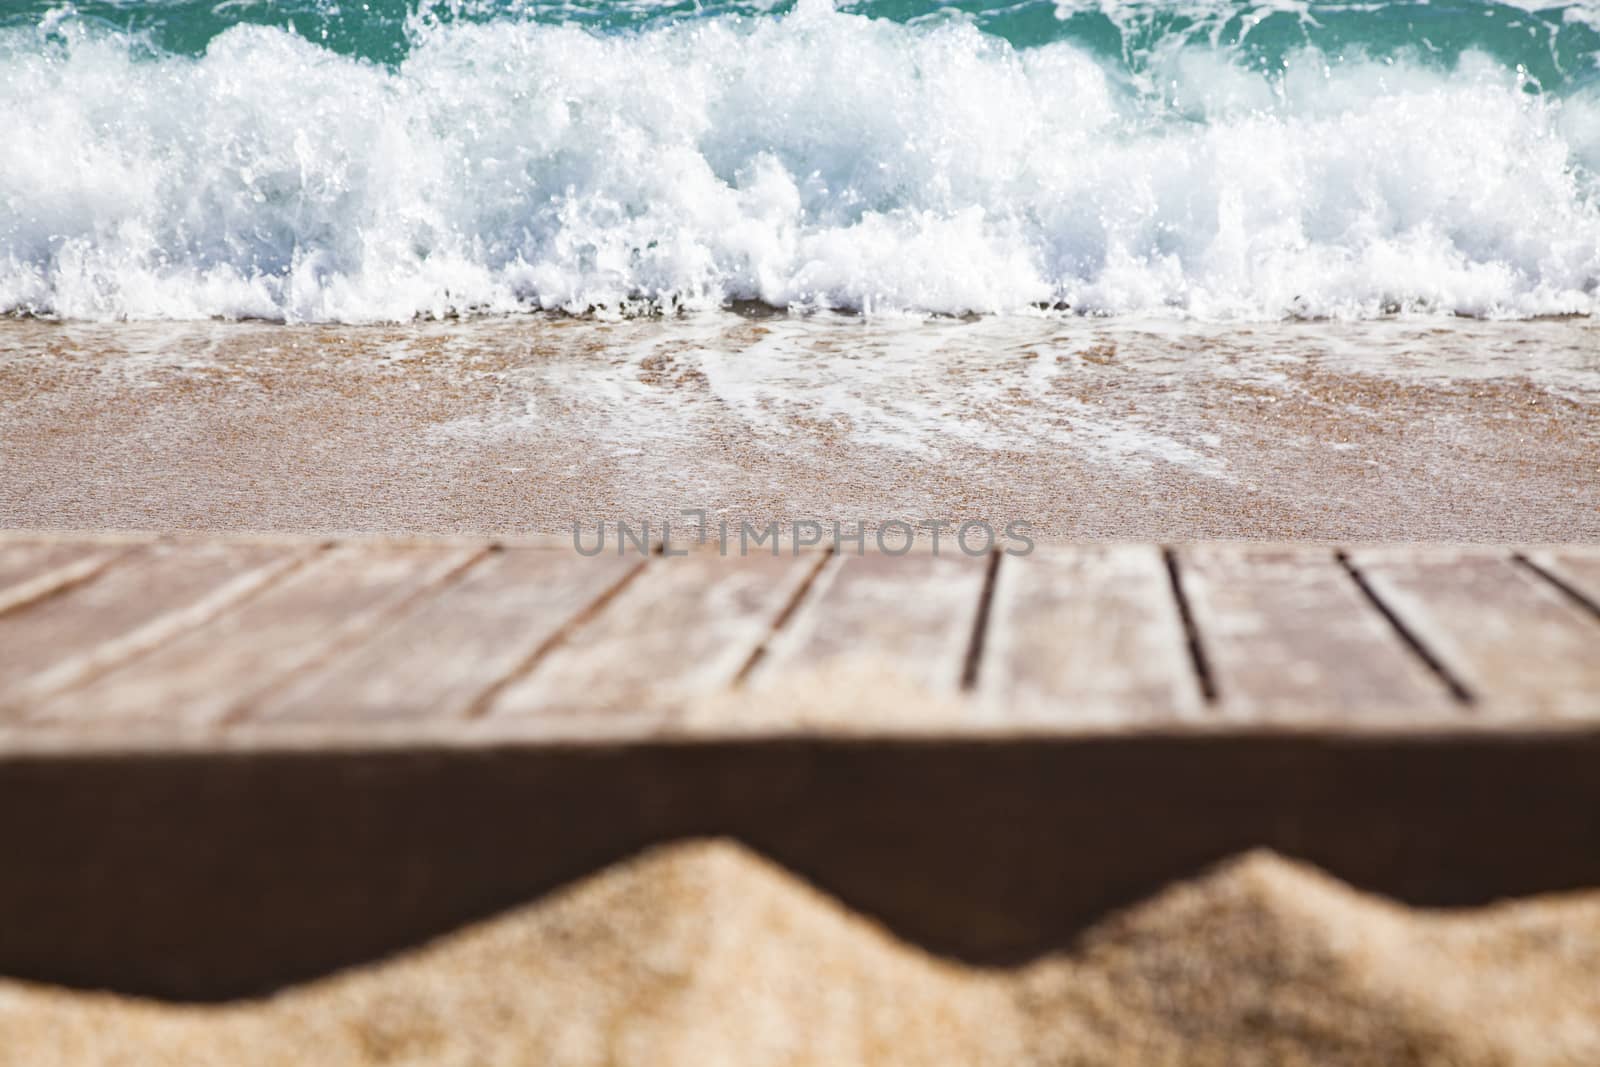 wooden plank in sand and blue sea in the background